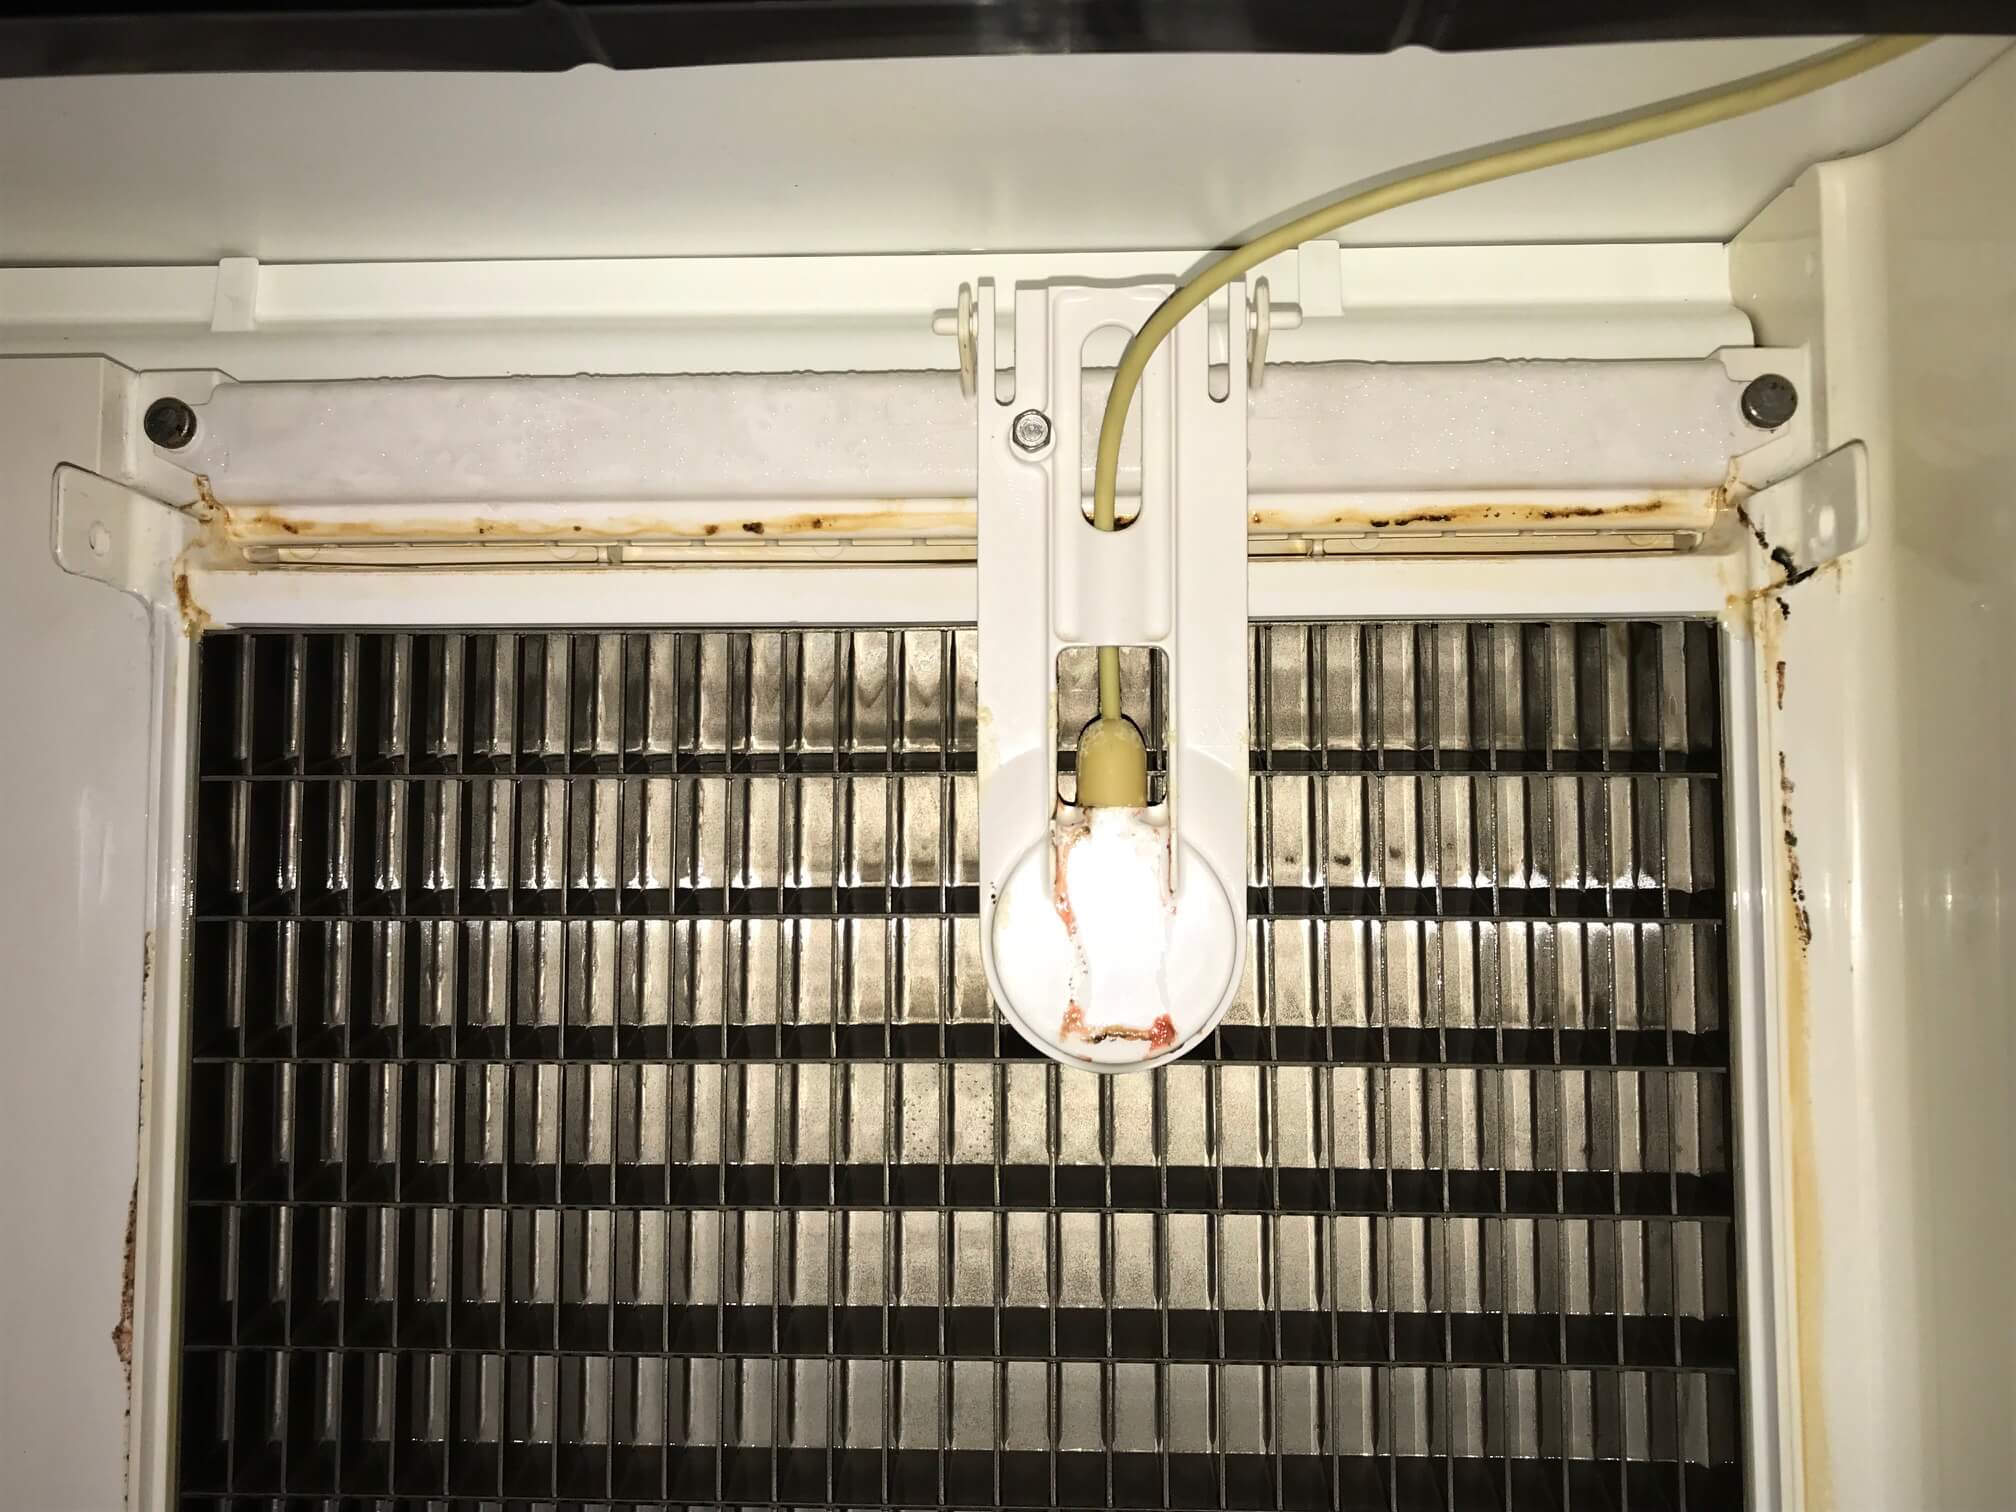 With our refrigeration services, the light's at the end of the chiller.